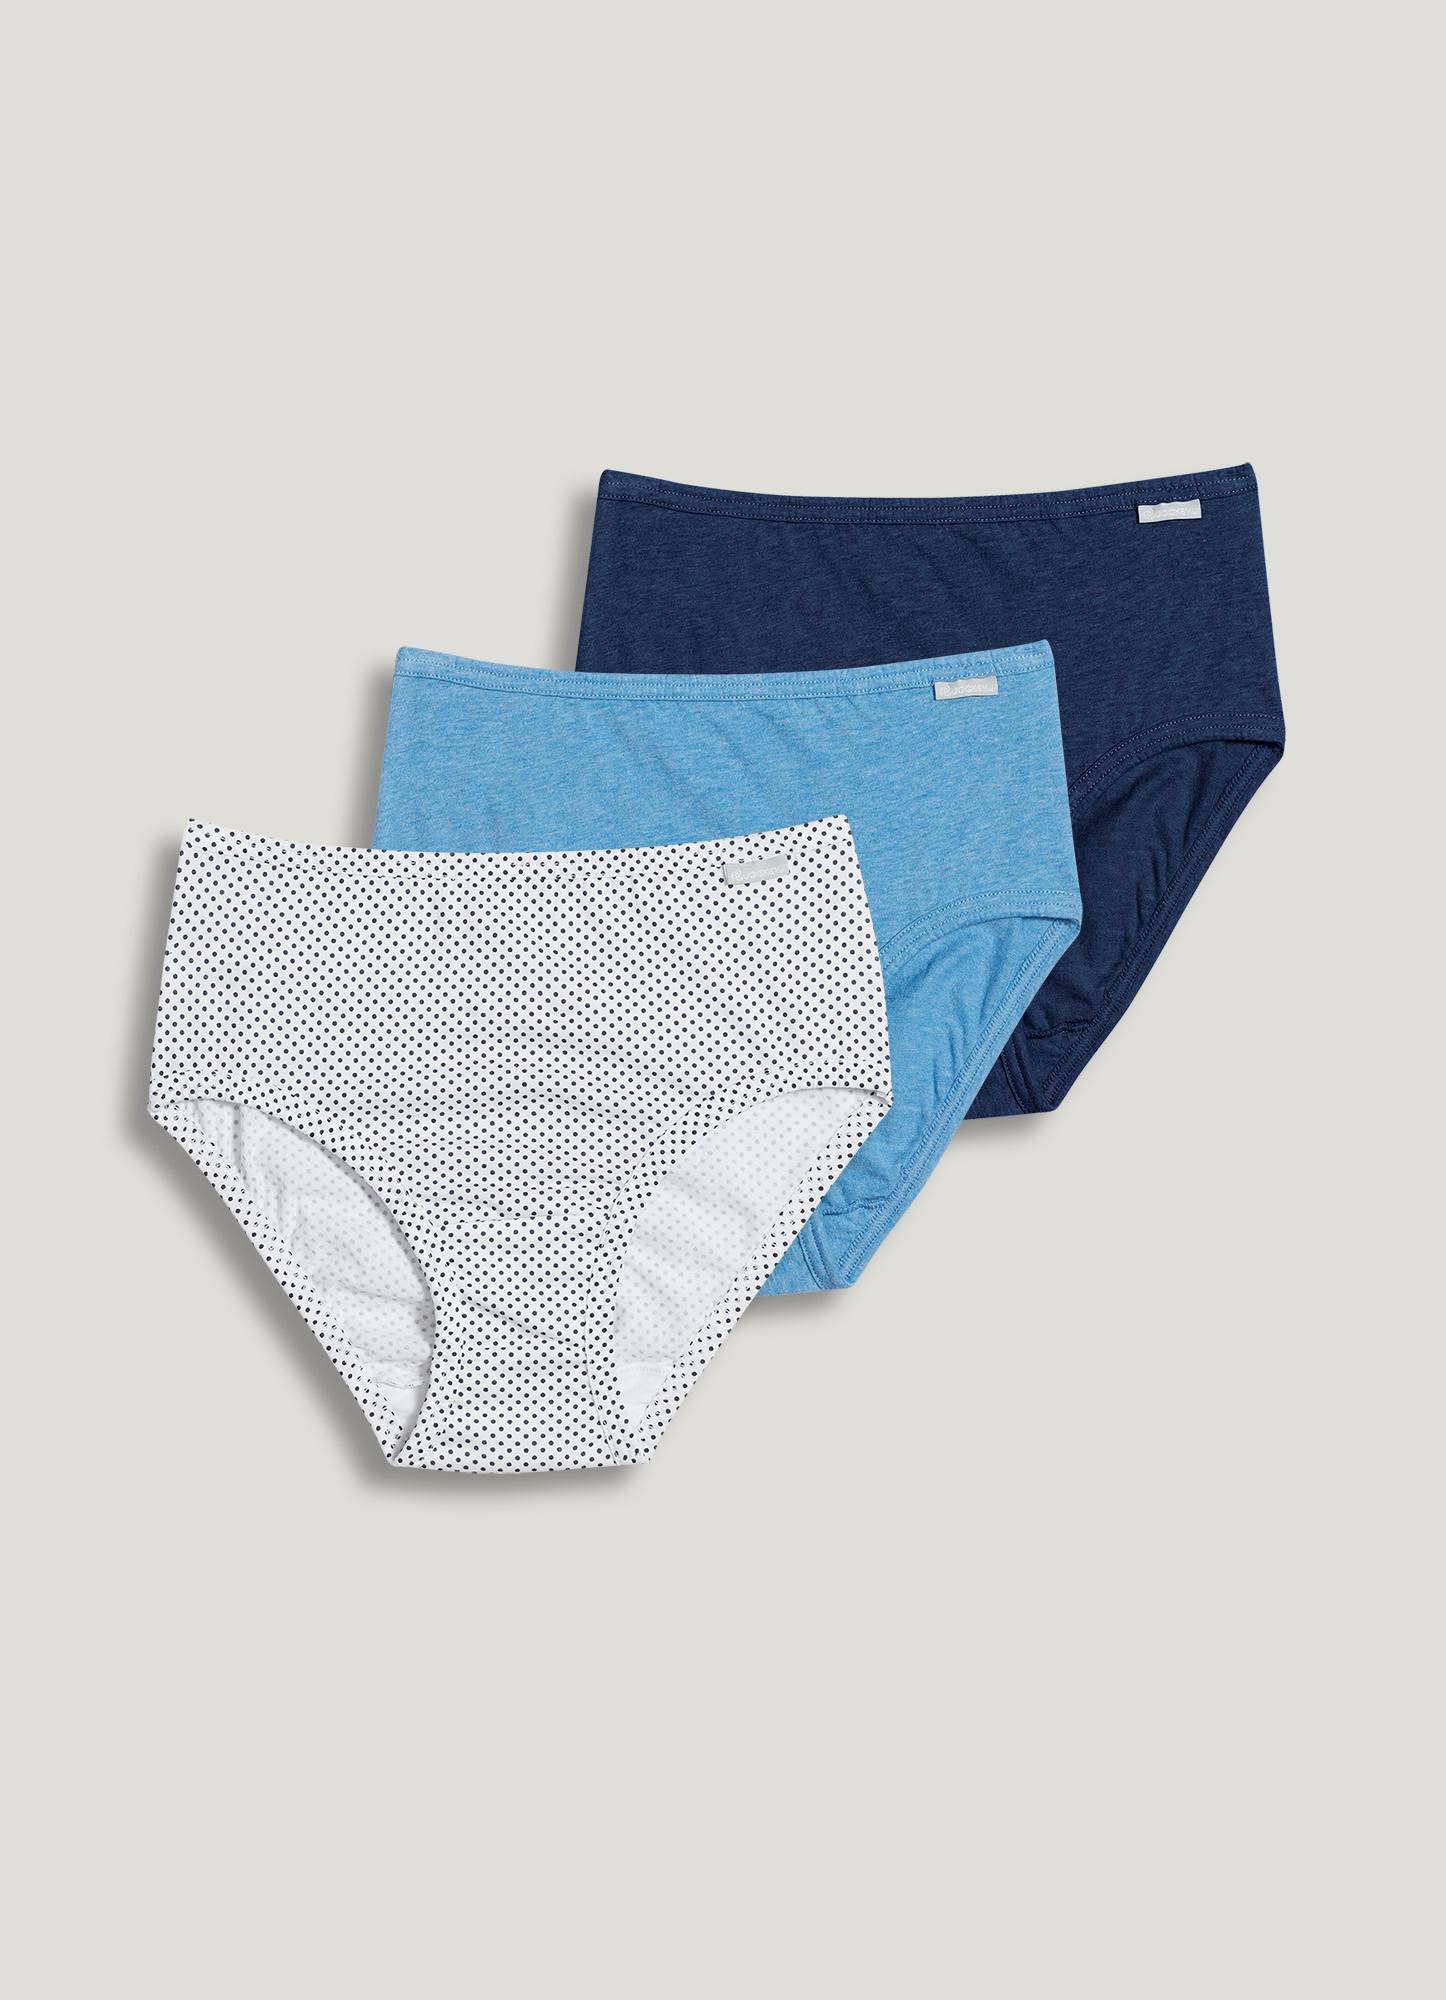 Jockey® 3-Pack Elance® Supersoft Hipsters (Plus Sizes Available